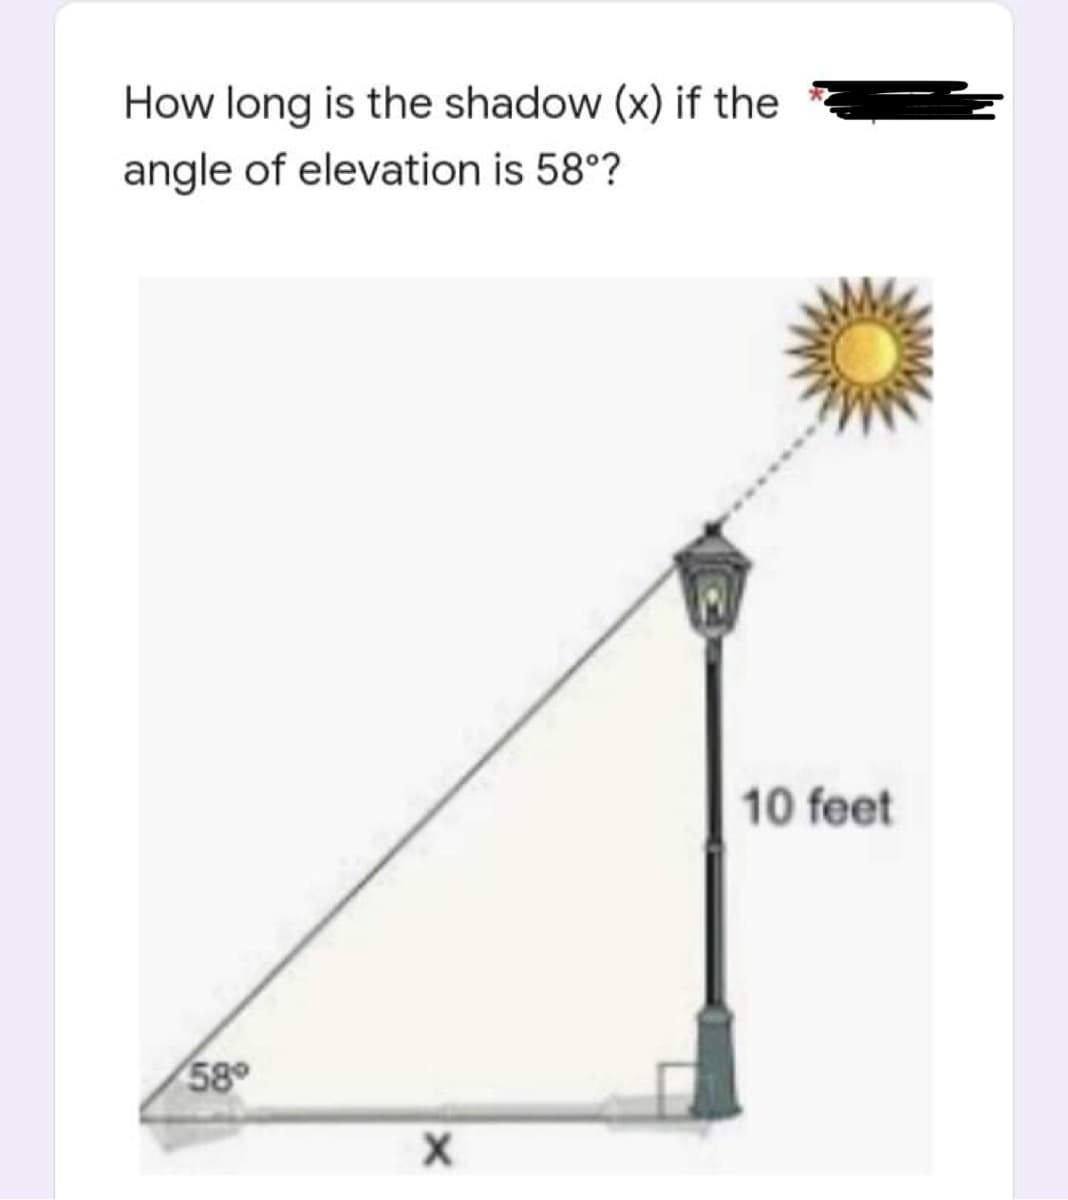 How long is the shadow (x) if the
angle of elevation is 58°?
58°
X
10 feet